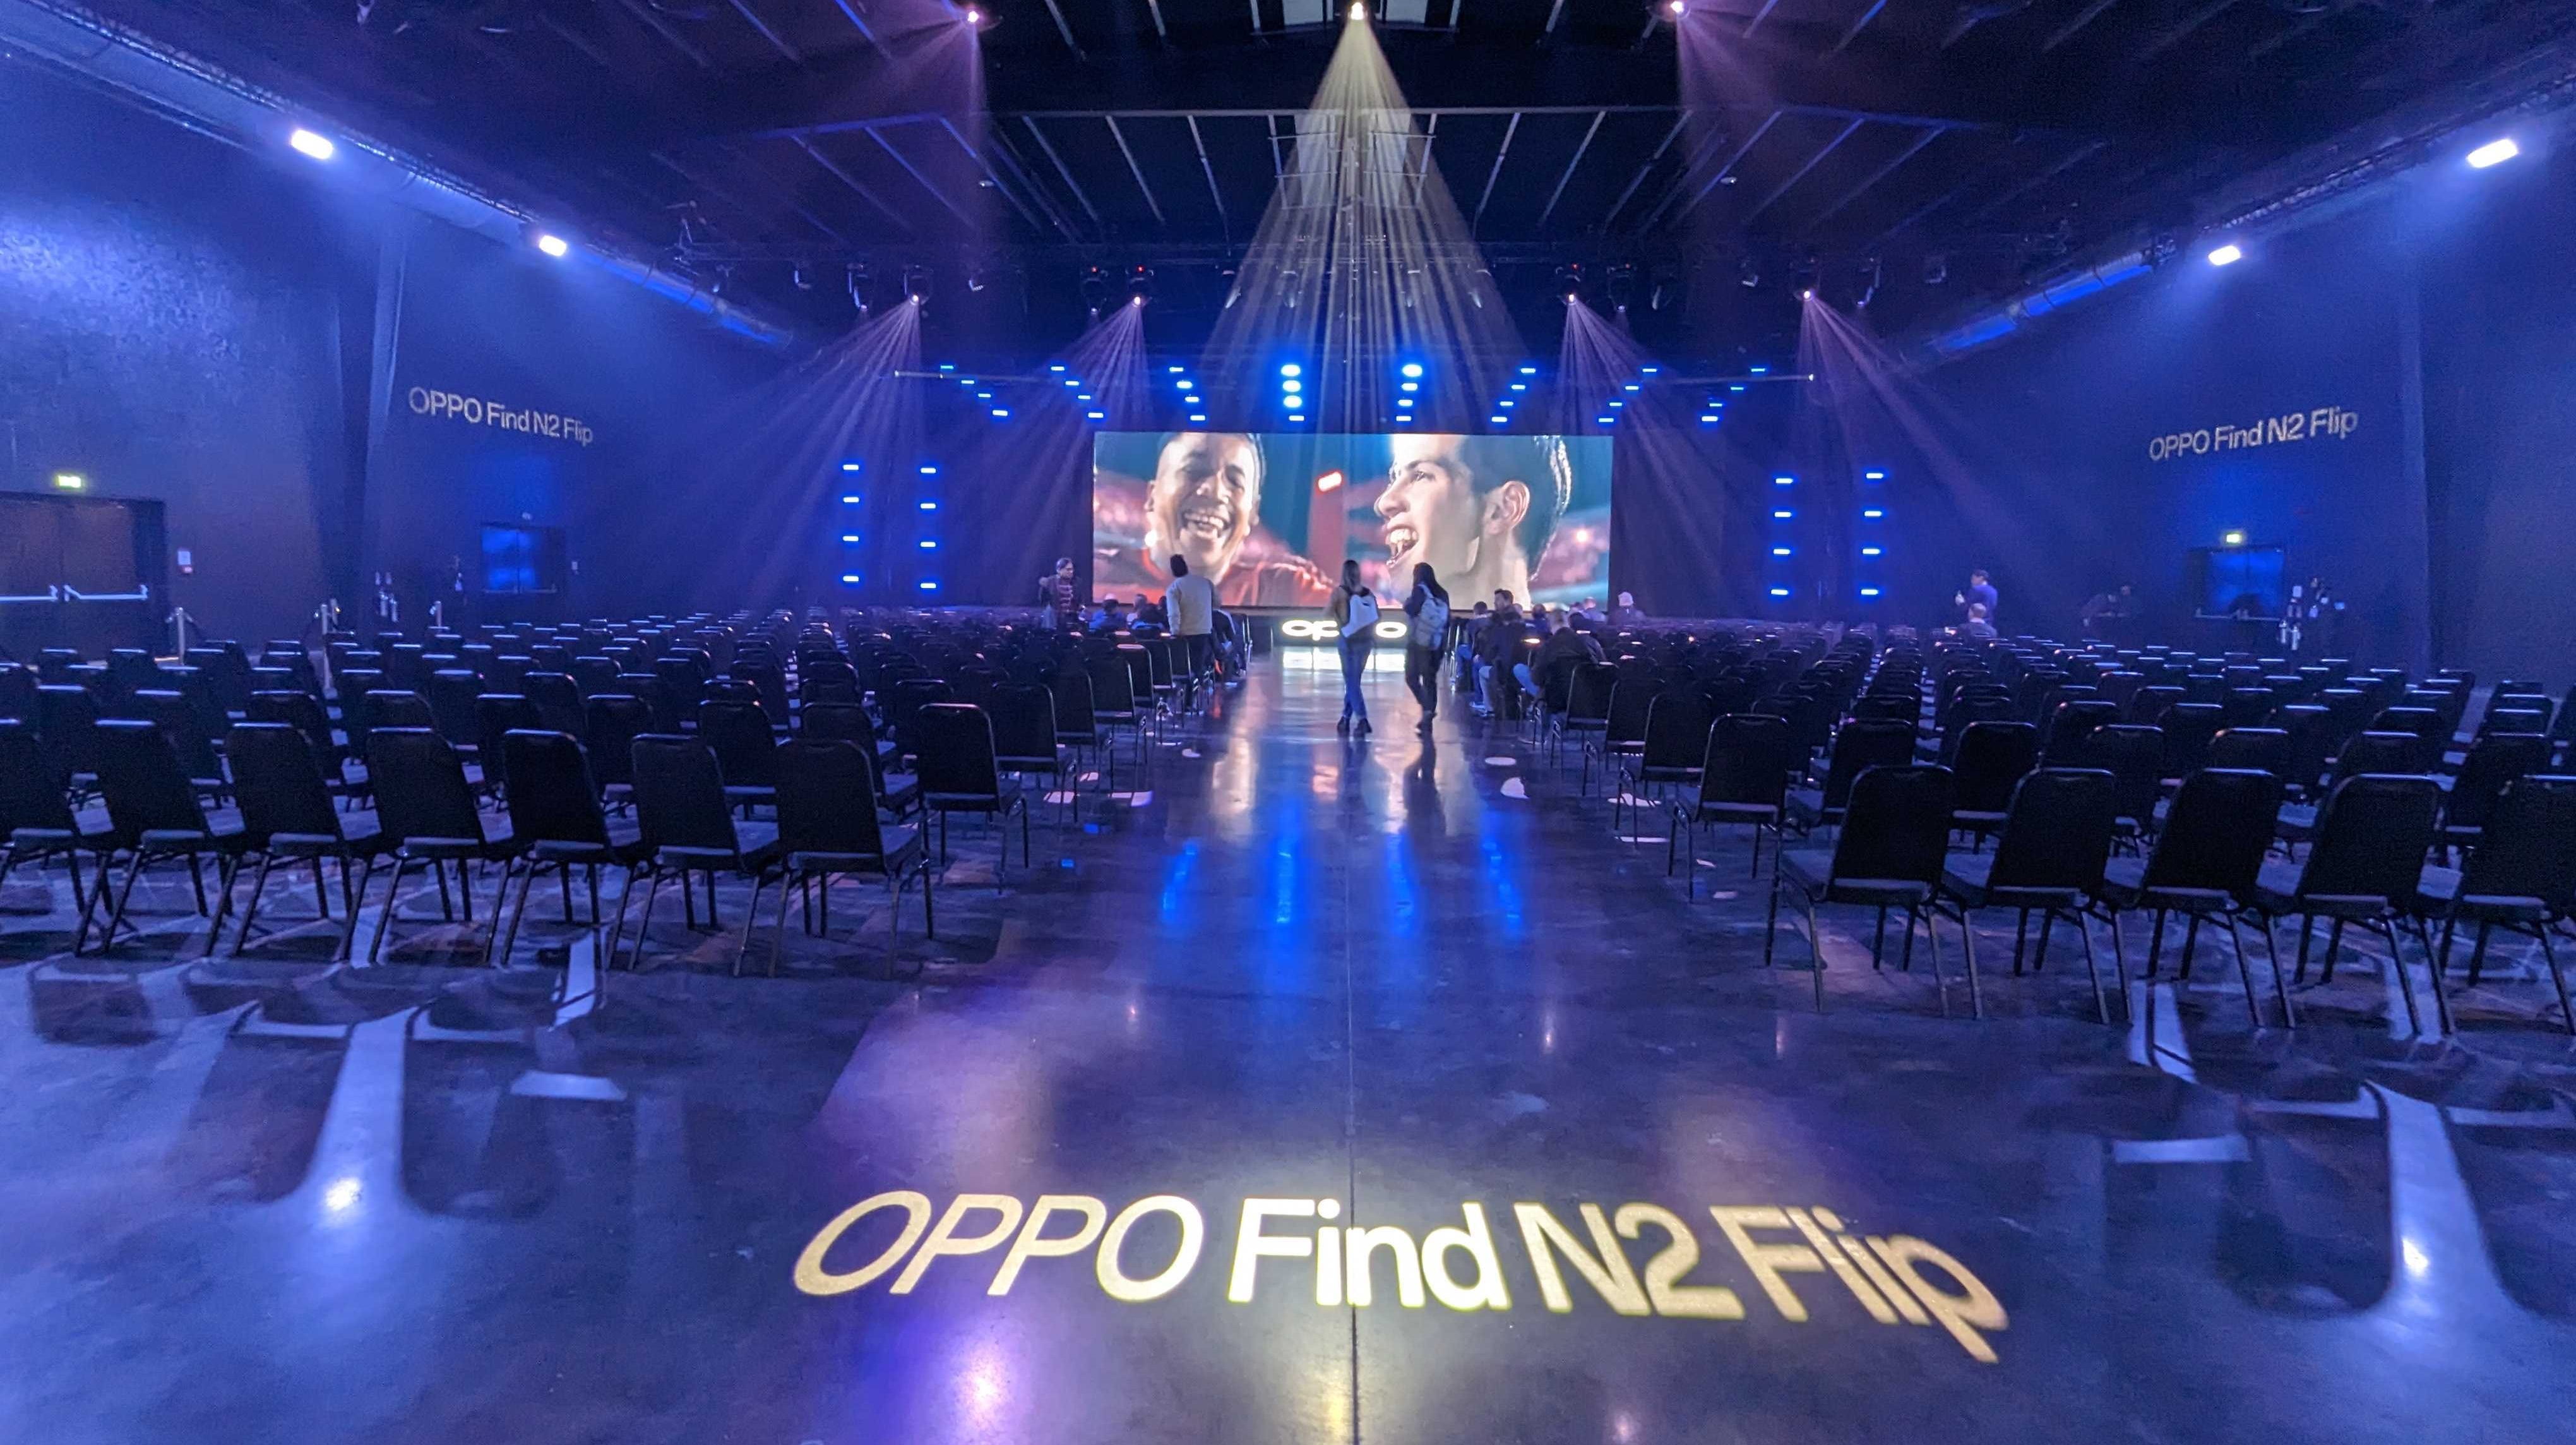 The Oppo Find N2 Flip launch event